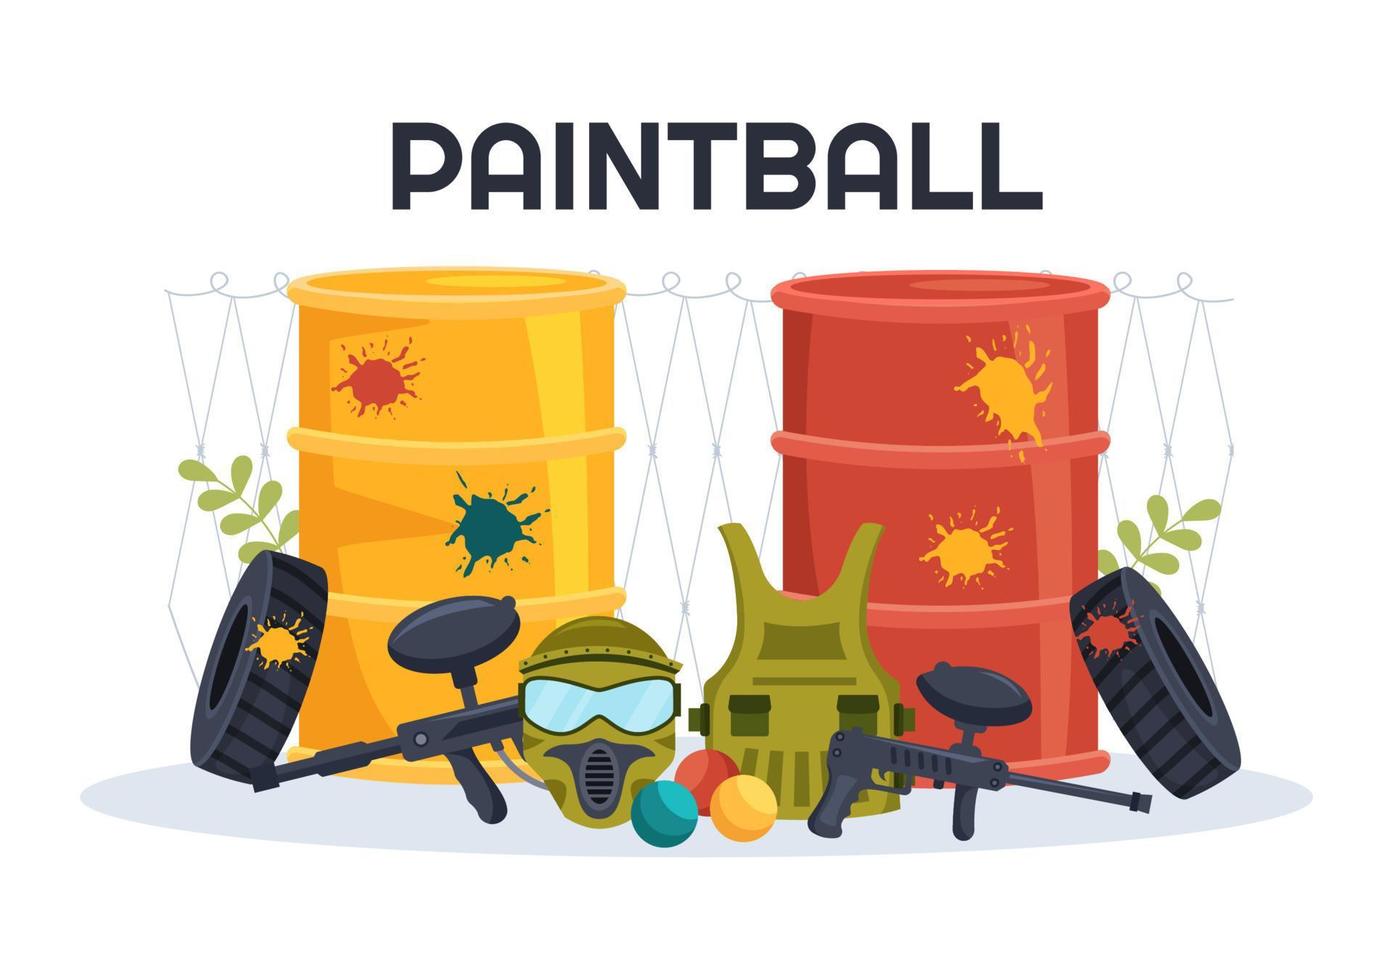 People Playing Paintball of Fighter Player Shooting with Gun Shoot, Aim, Attack in Field Scene in Flat Cartoon Hand Drawn Template Illustration vector